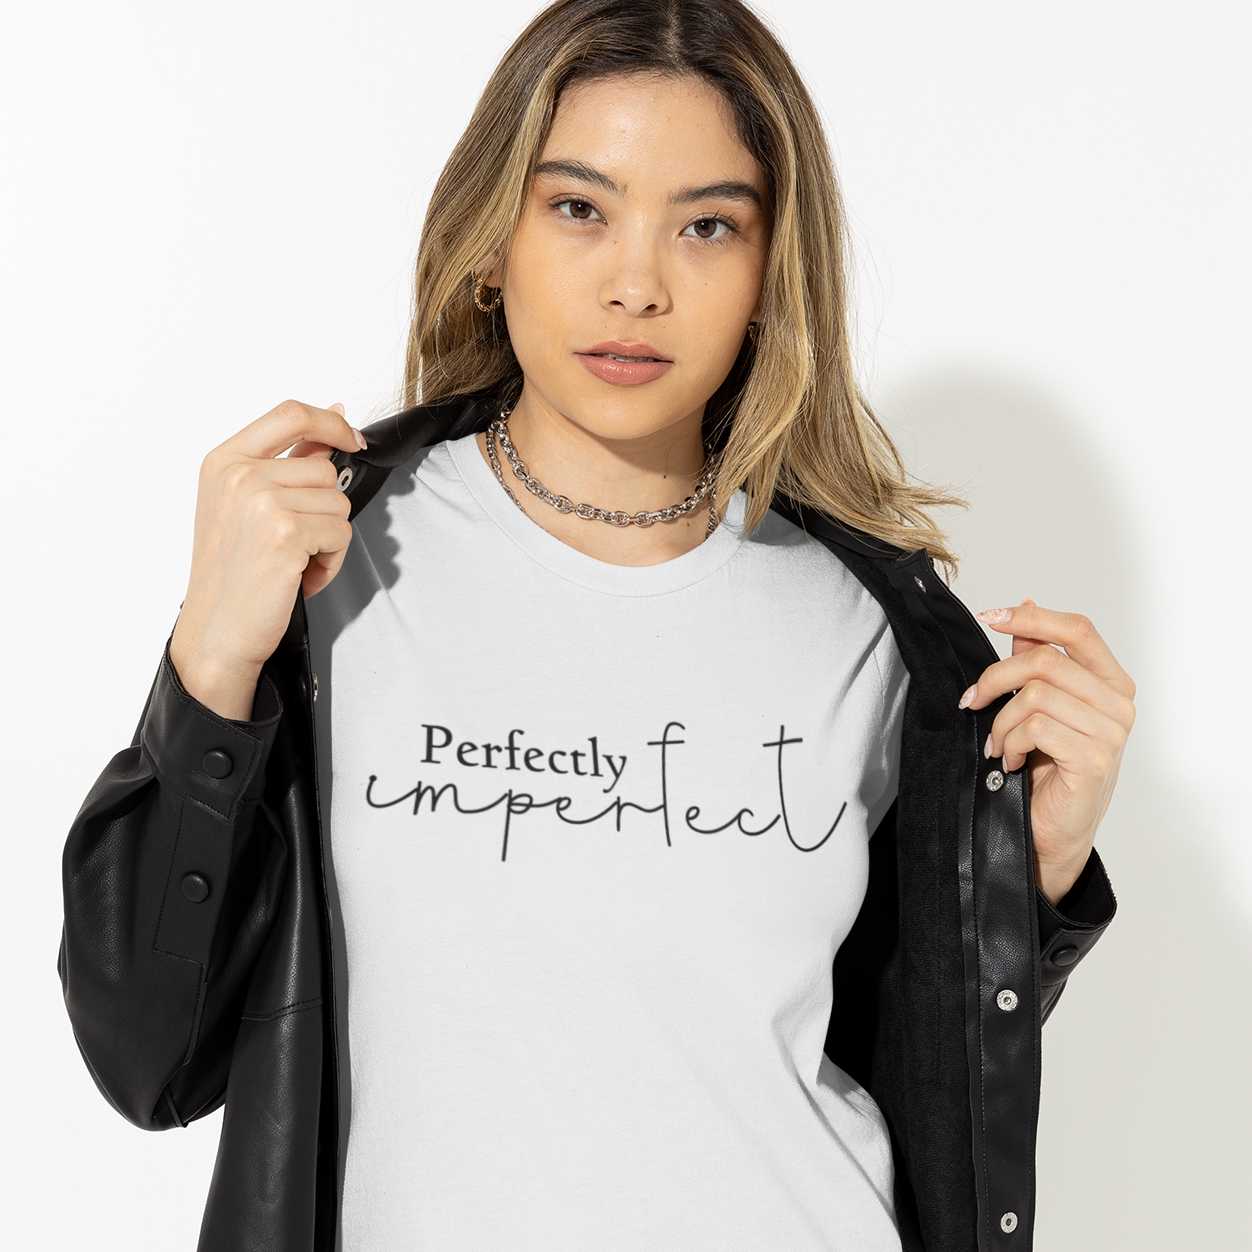 perfectly-imperfect-t-shirt-mockup-of-a-woman-posing-with-a-serious-look-and-a-leather-jacket-